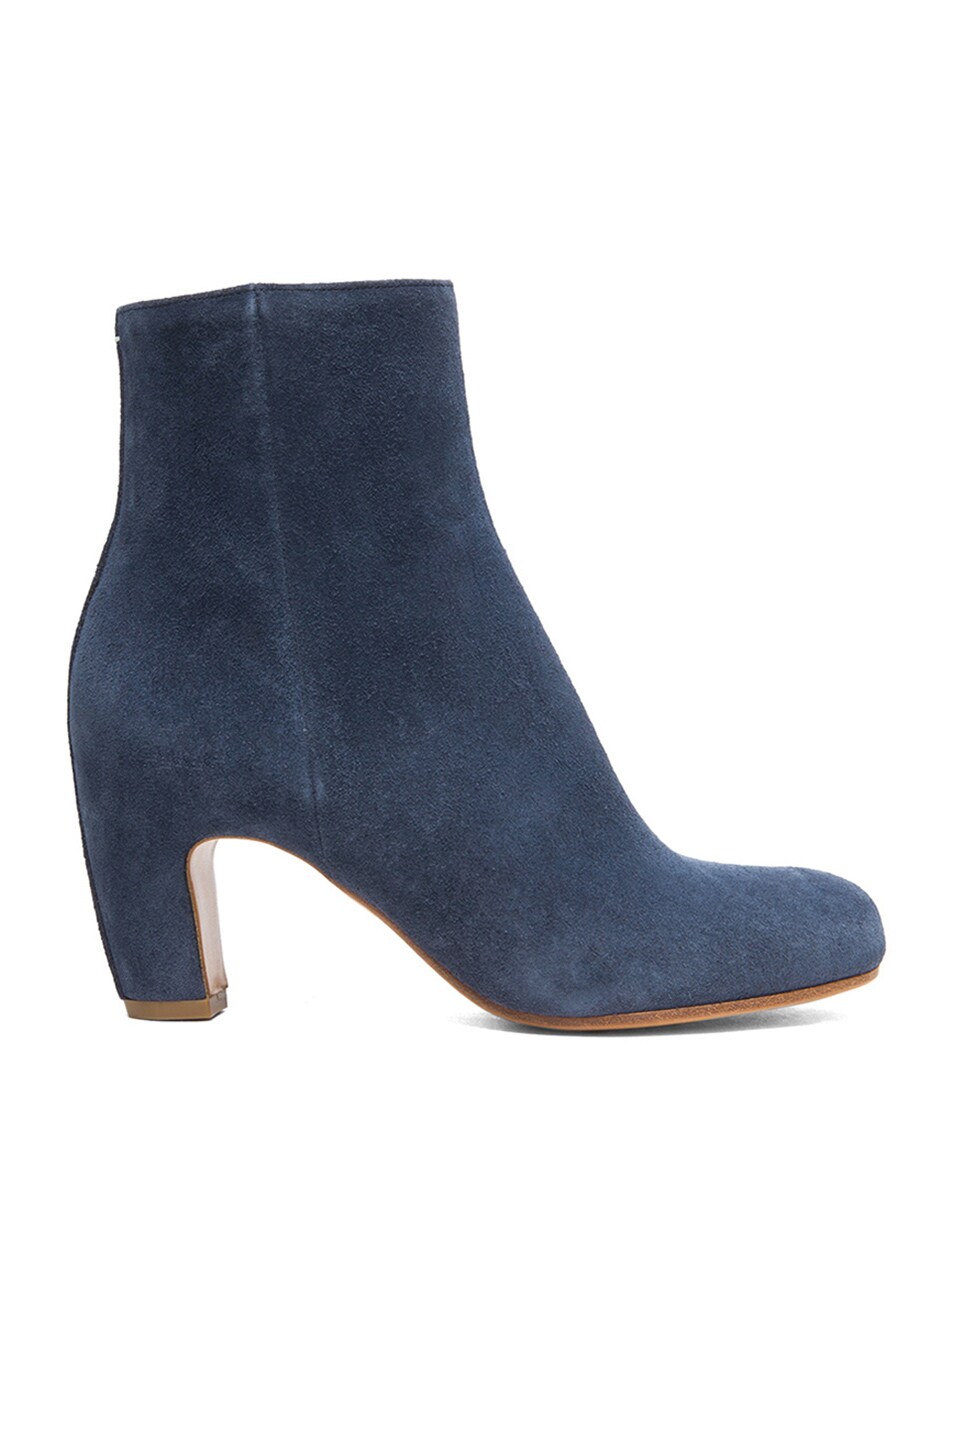 Image 1 of Maison Margiela Curved Heel Suede Boots in Navy